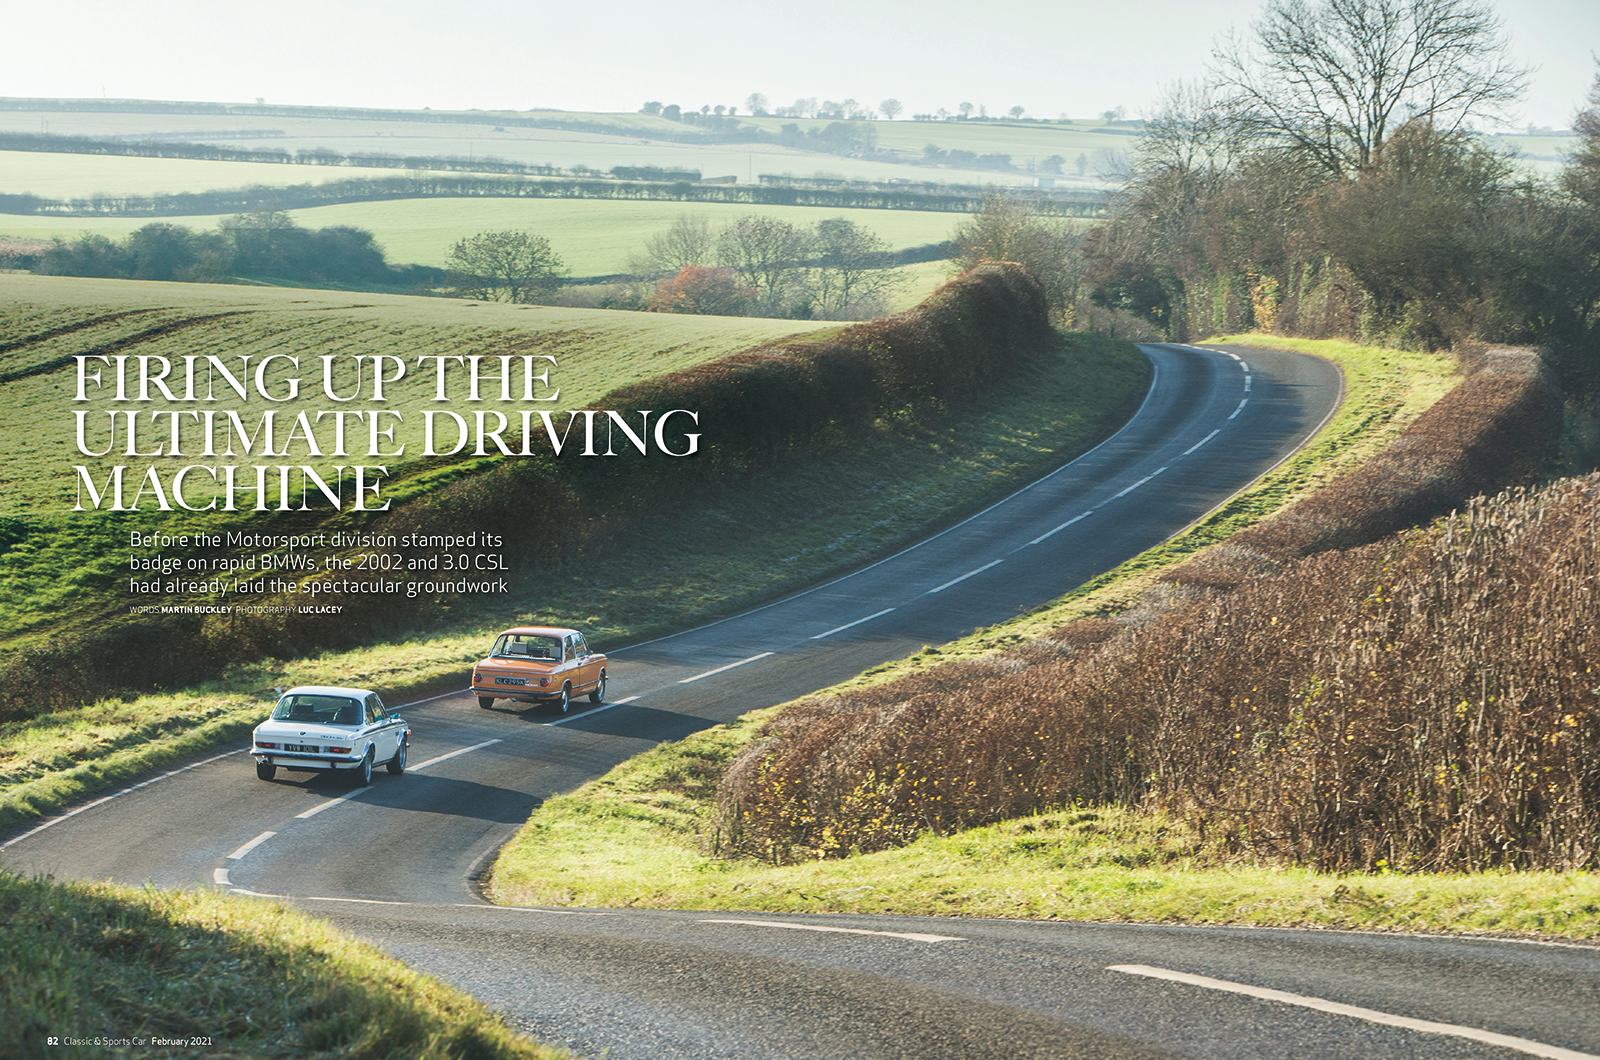 Classic & Sports Car – BMW 2002 and 3.0 CSL: inside the February 2021 issue of C&SC